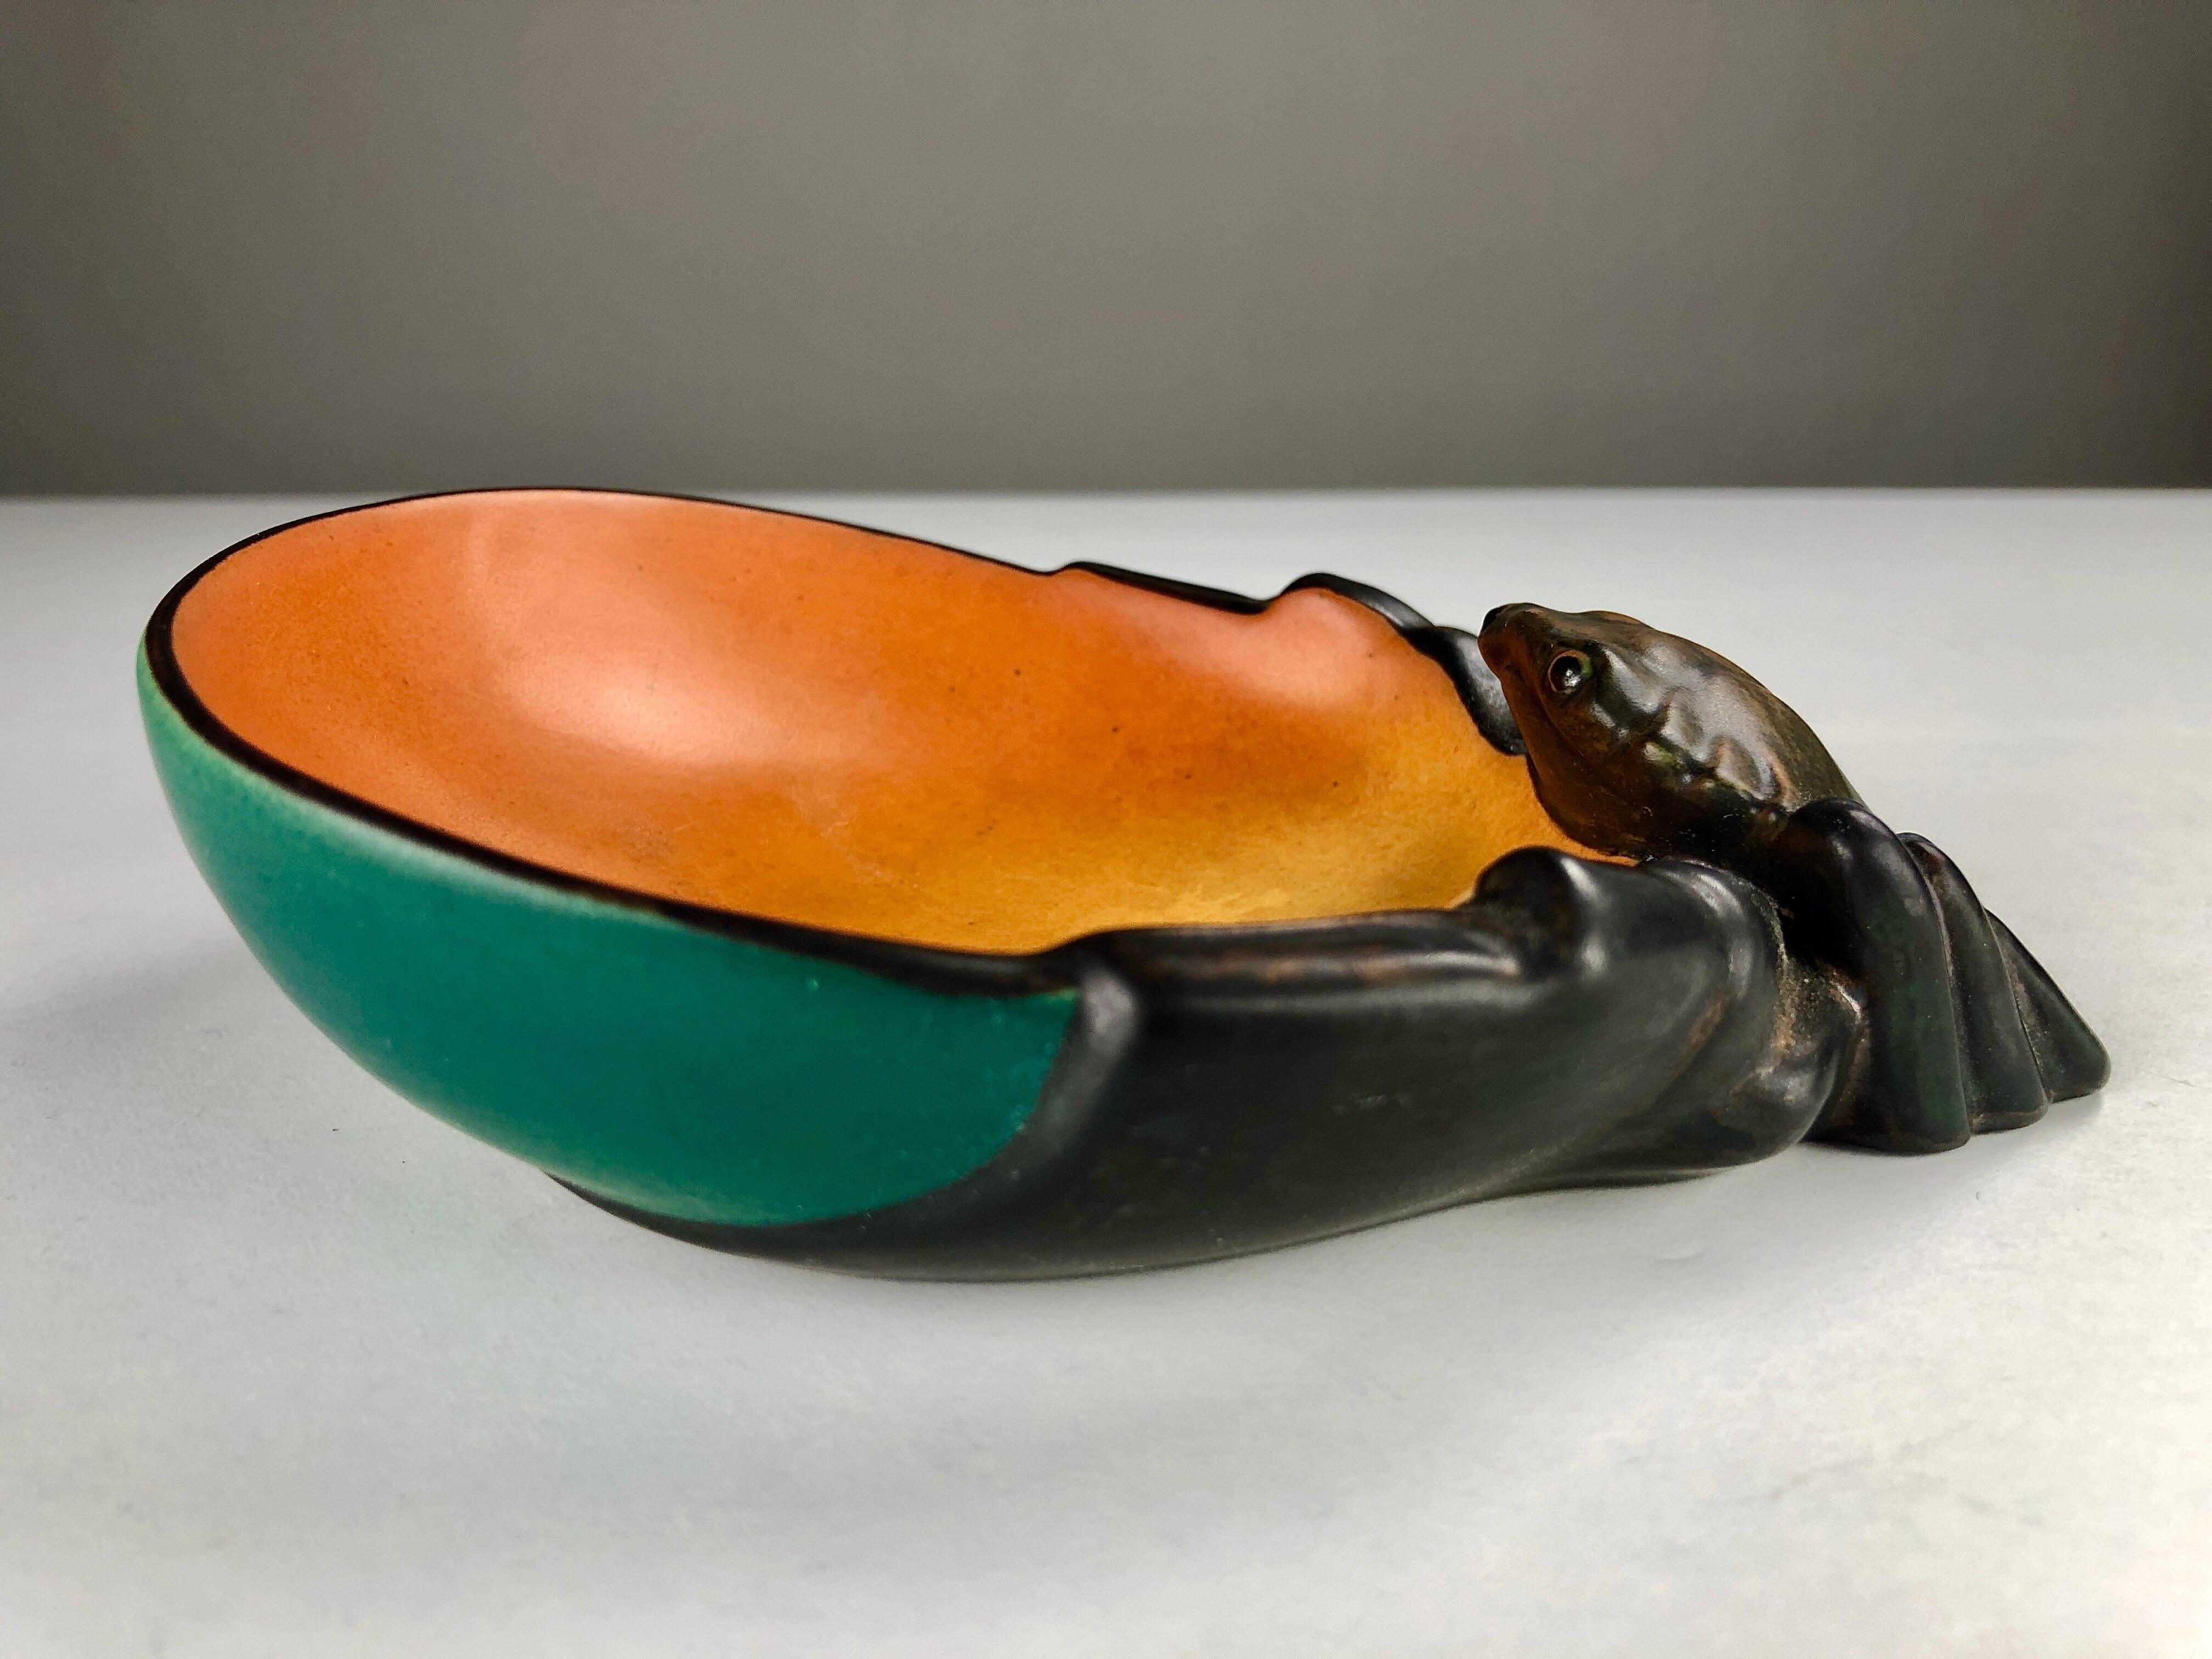 20th Century Danish Hand-Crafted Art Nouveau Ash Tray / Bowl by Georg Jensen for Ipsens Enke For Sale